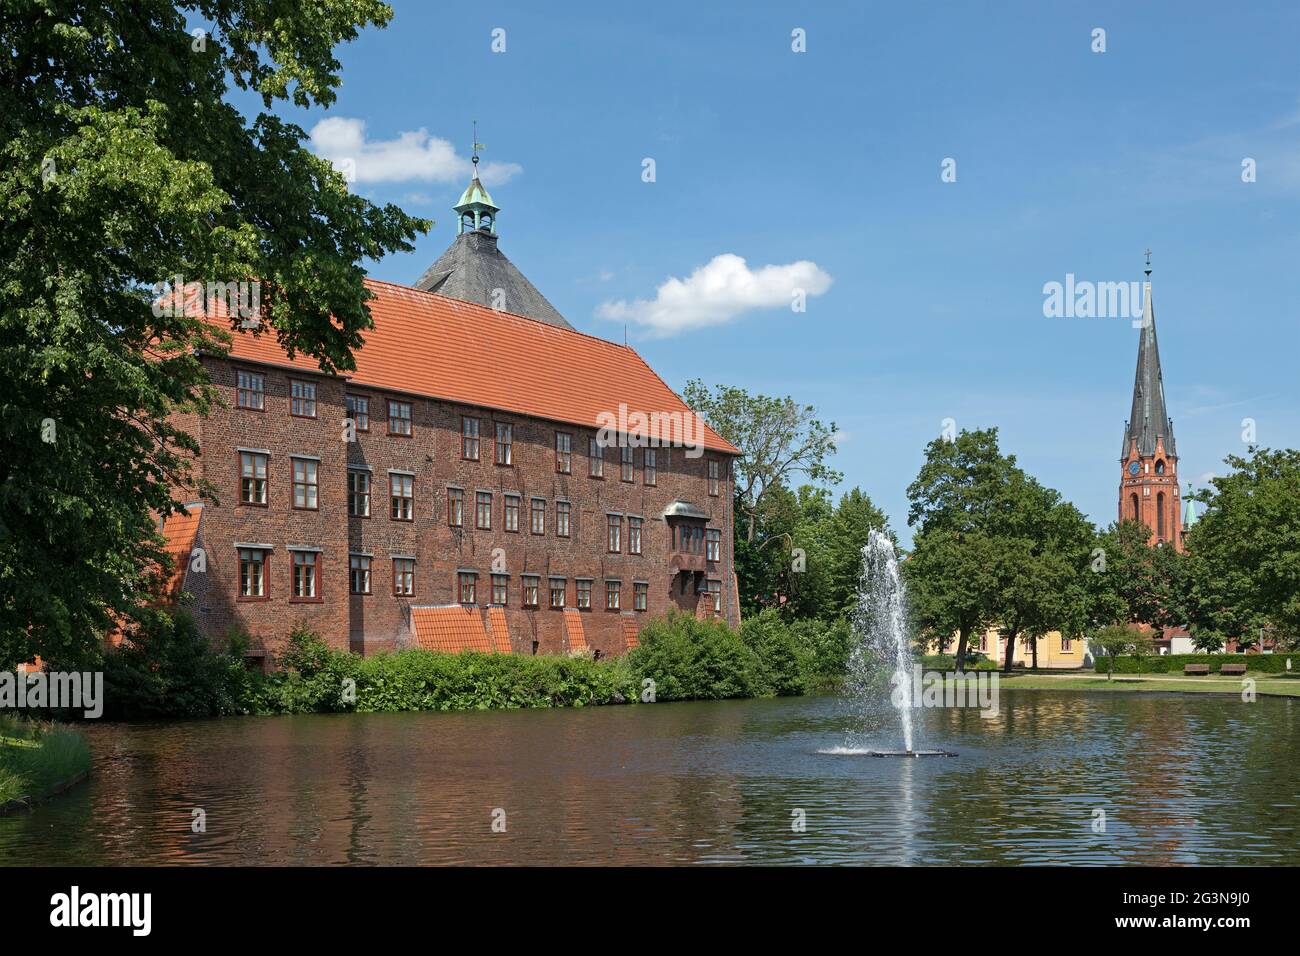 castle and church of St. Mary, Winsen/Luhe, Lower Saxony, Germany Stock Photo